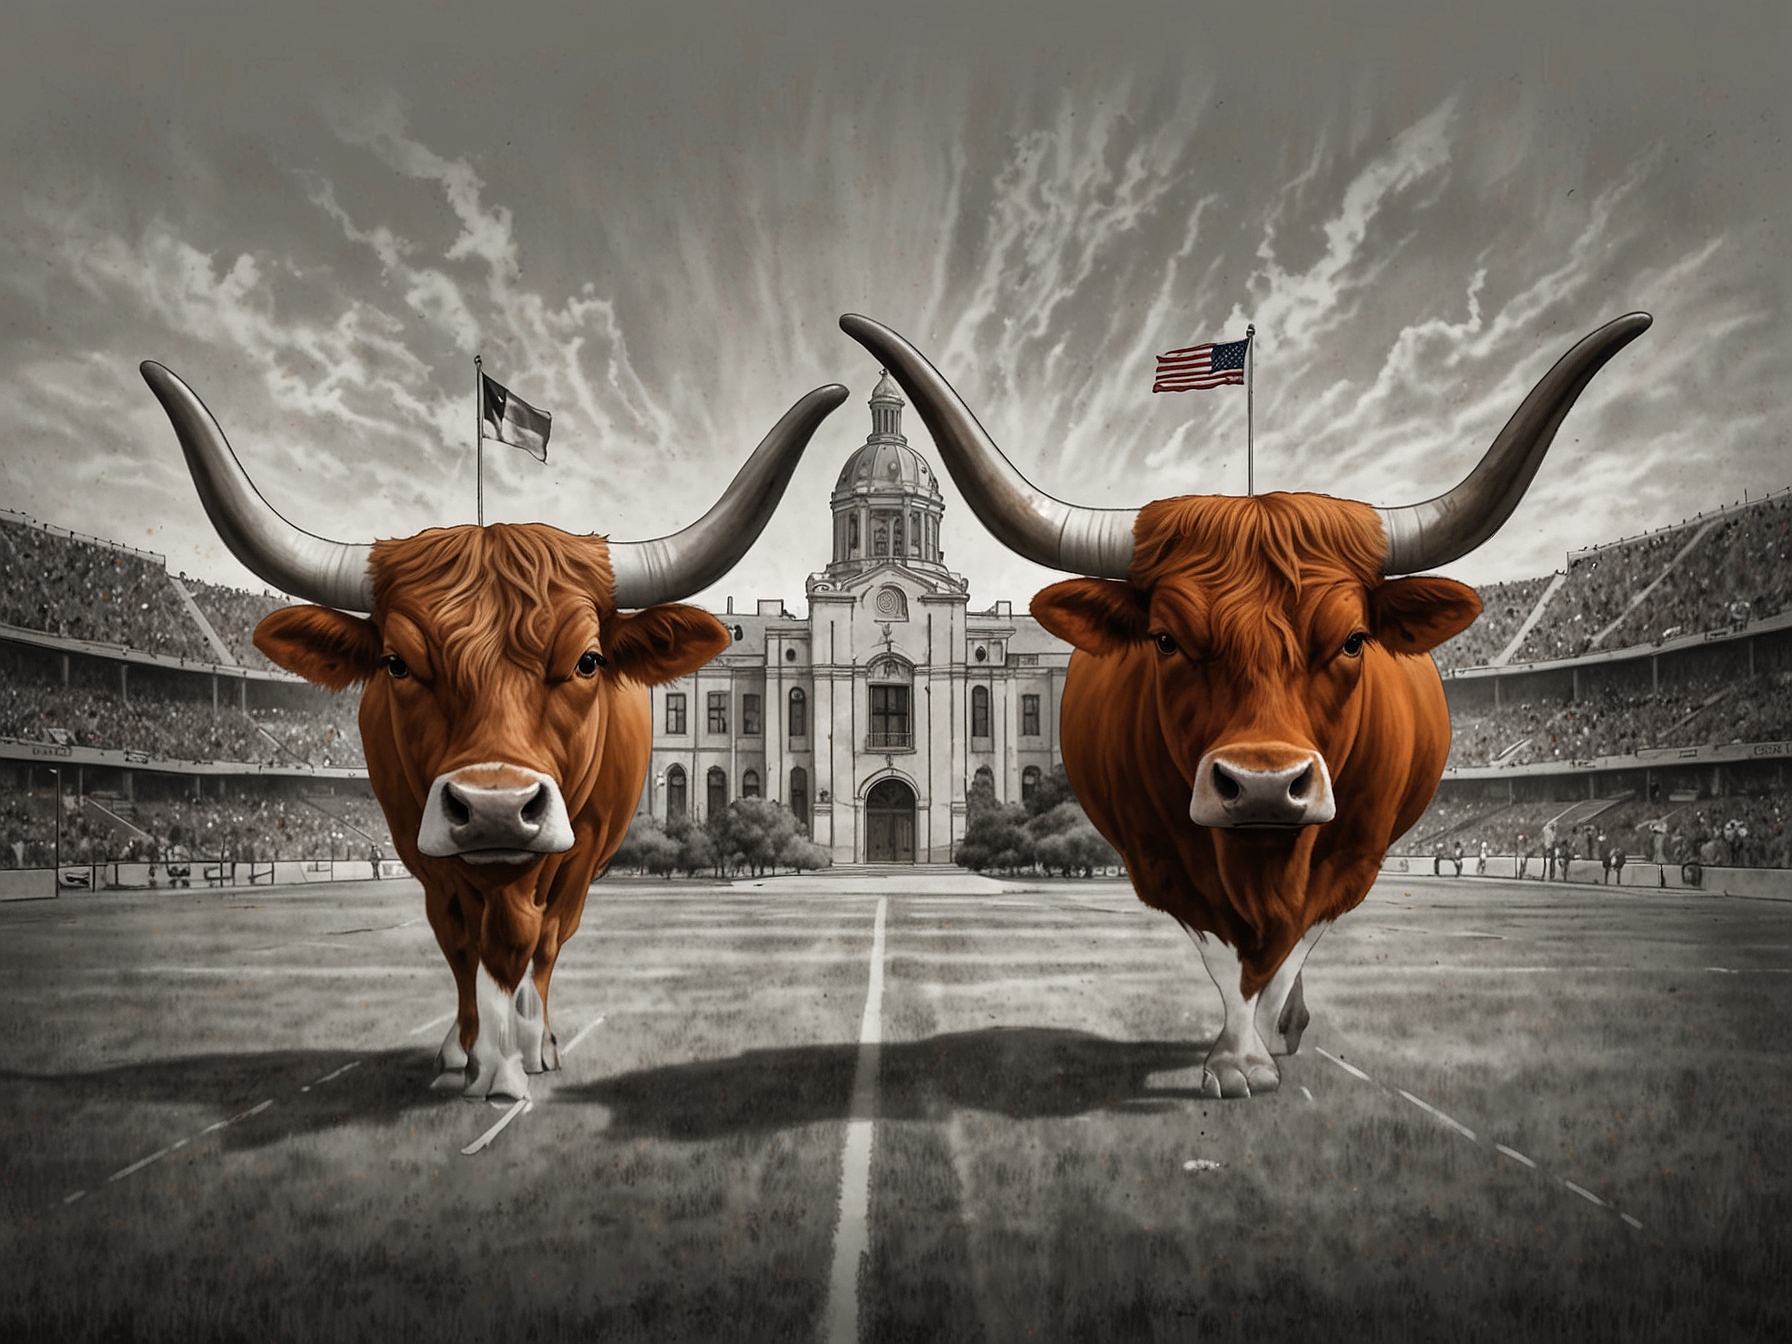 Illustration of Texas Longhorns and Oklahoma Sooners' logos, symbolizing their transition from the Big 12 to the SEC, showcasing the excitement and anticipation of this significant move in college sports.